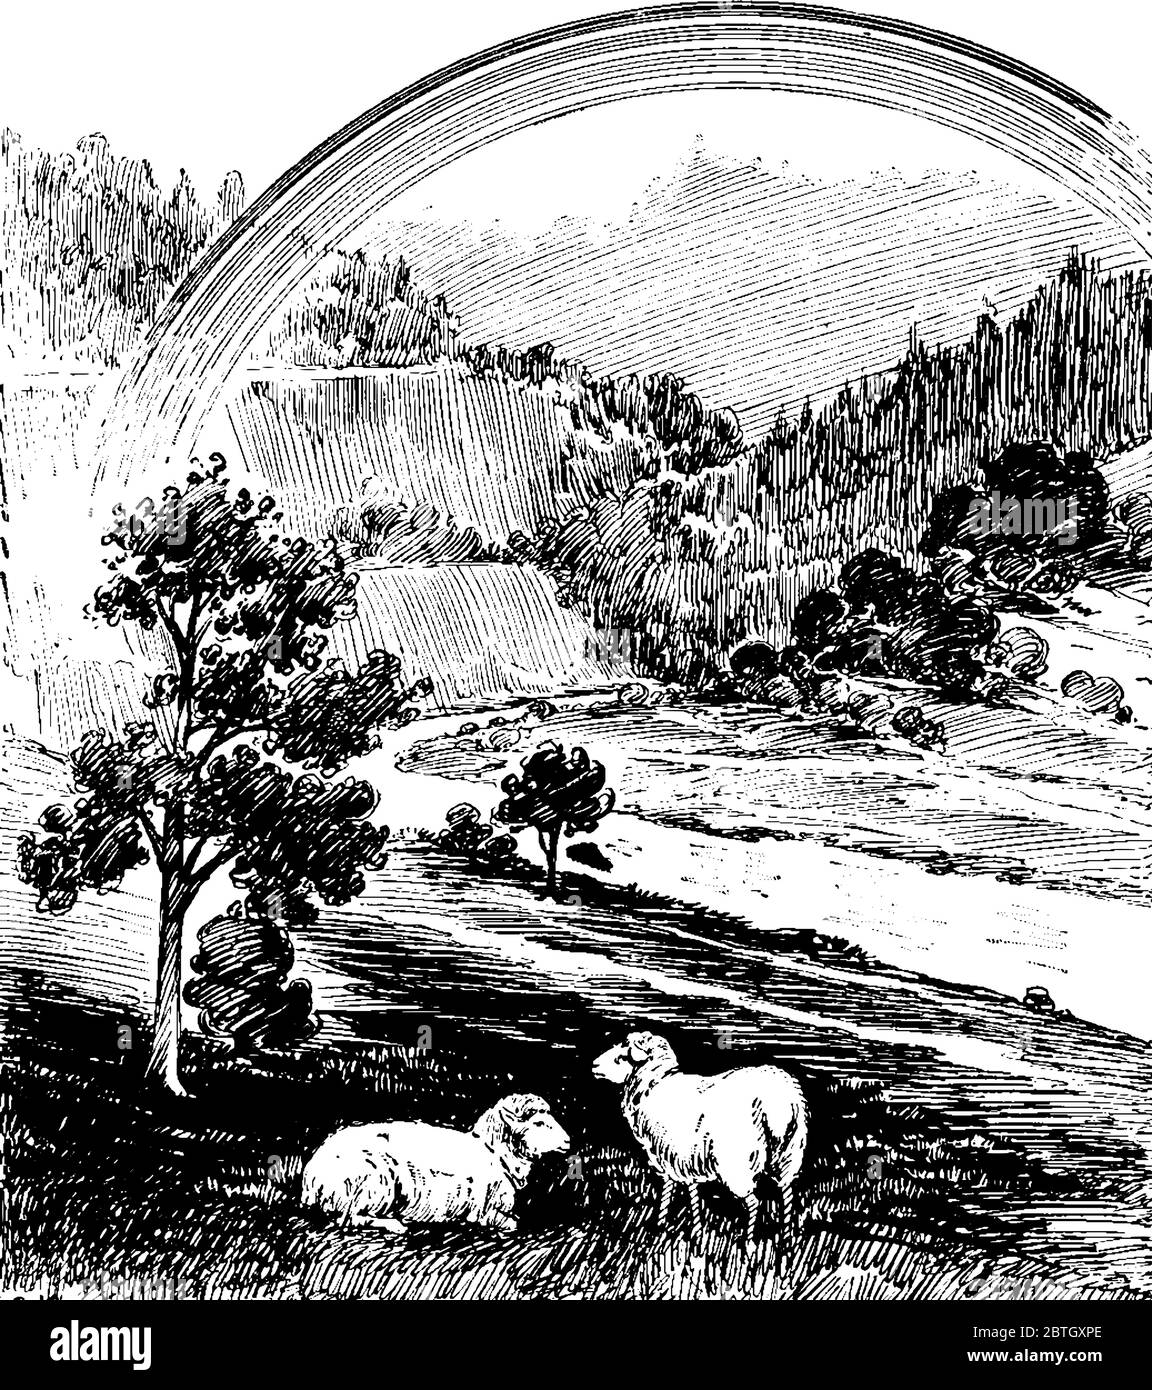 A landscape picture containing two sheep's, mountains and trees in background and also rainbow is showing, vintage line drawing or engraving illustrat Stock Vector